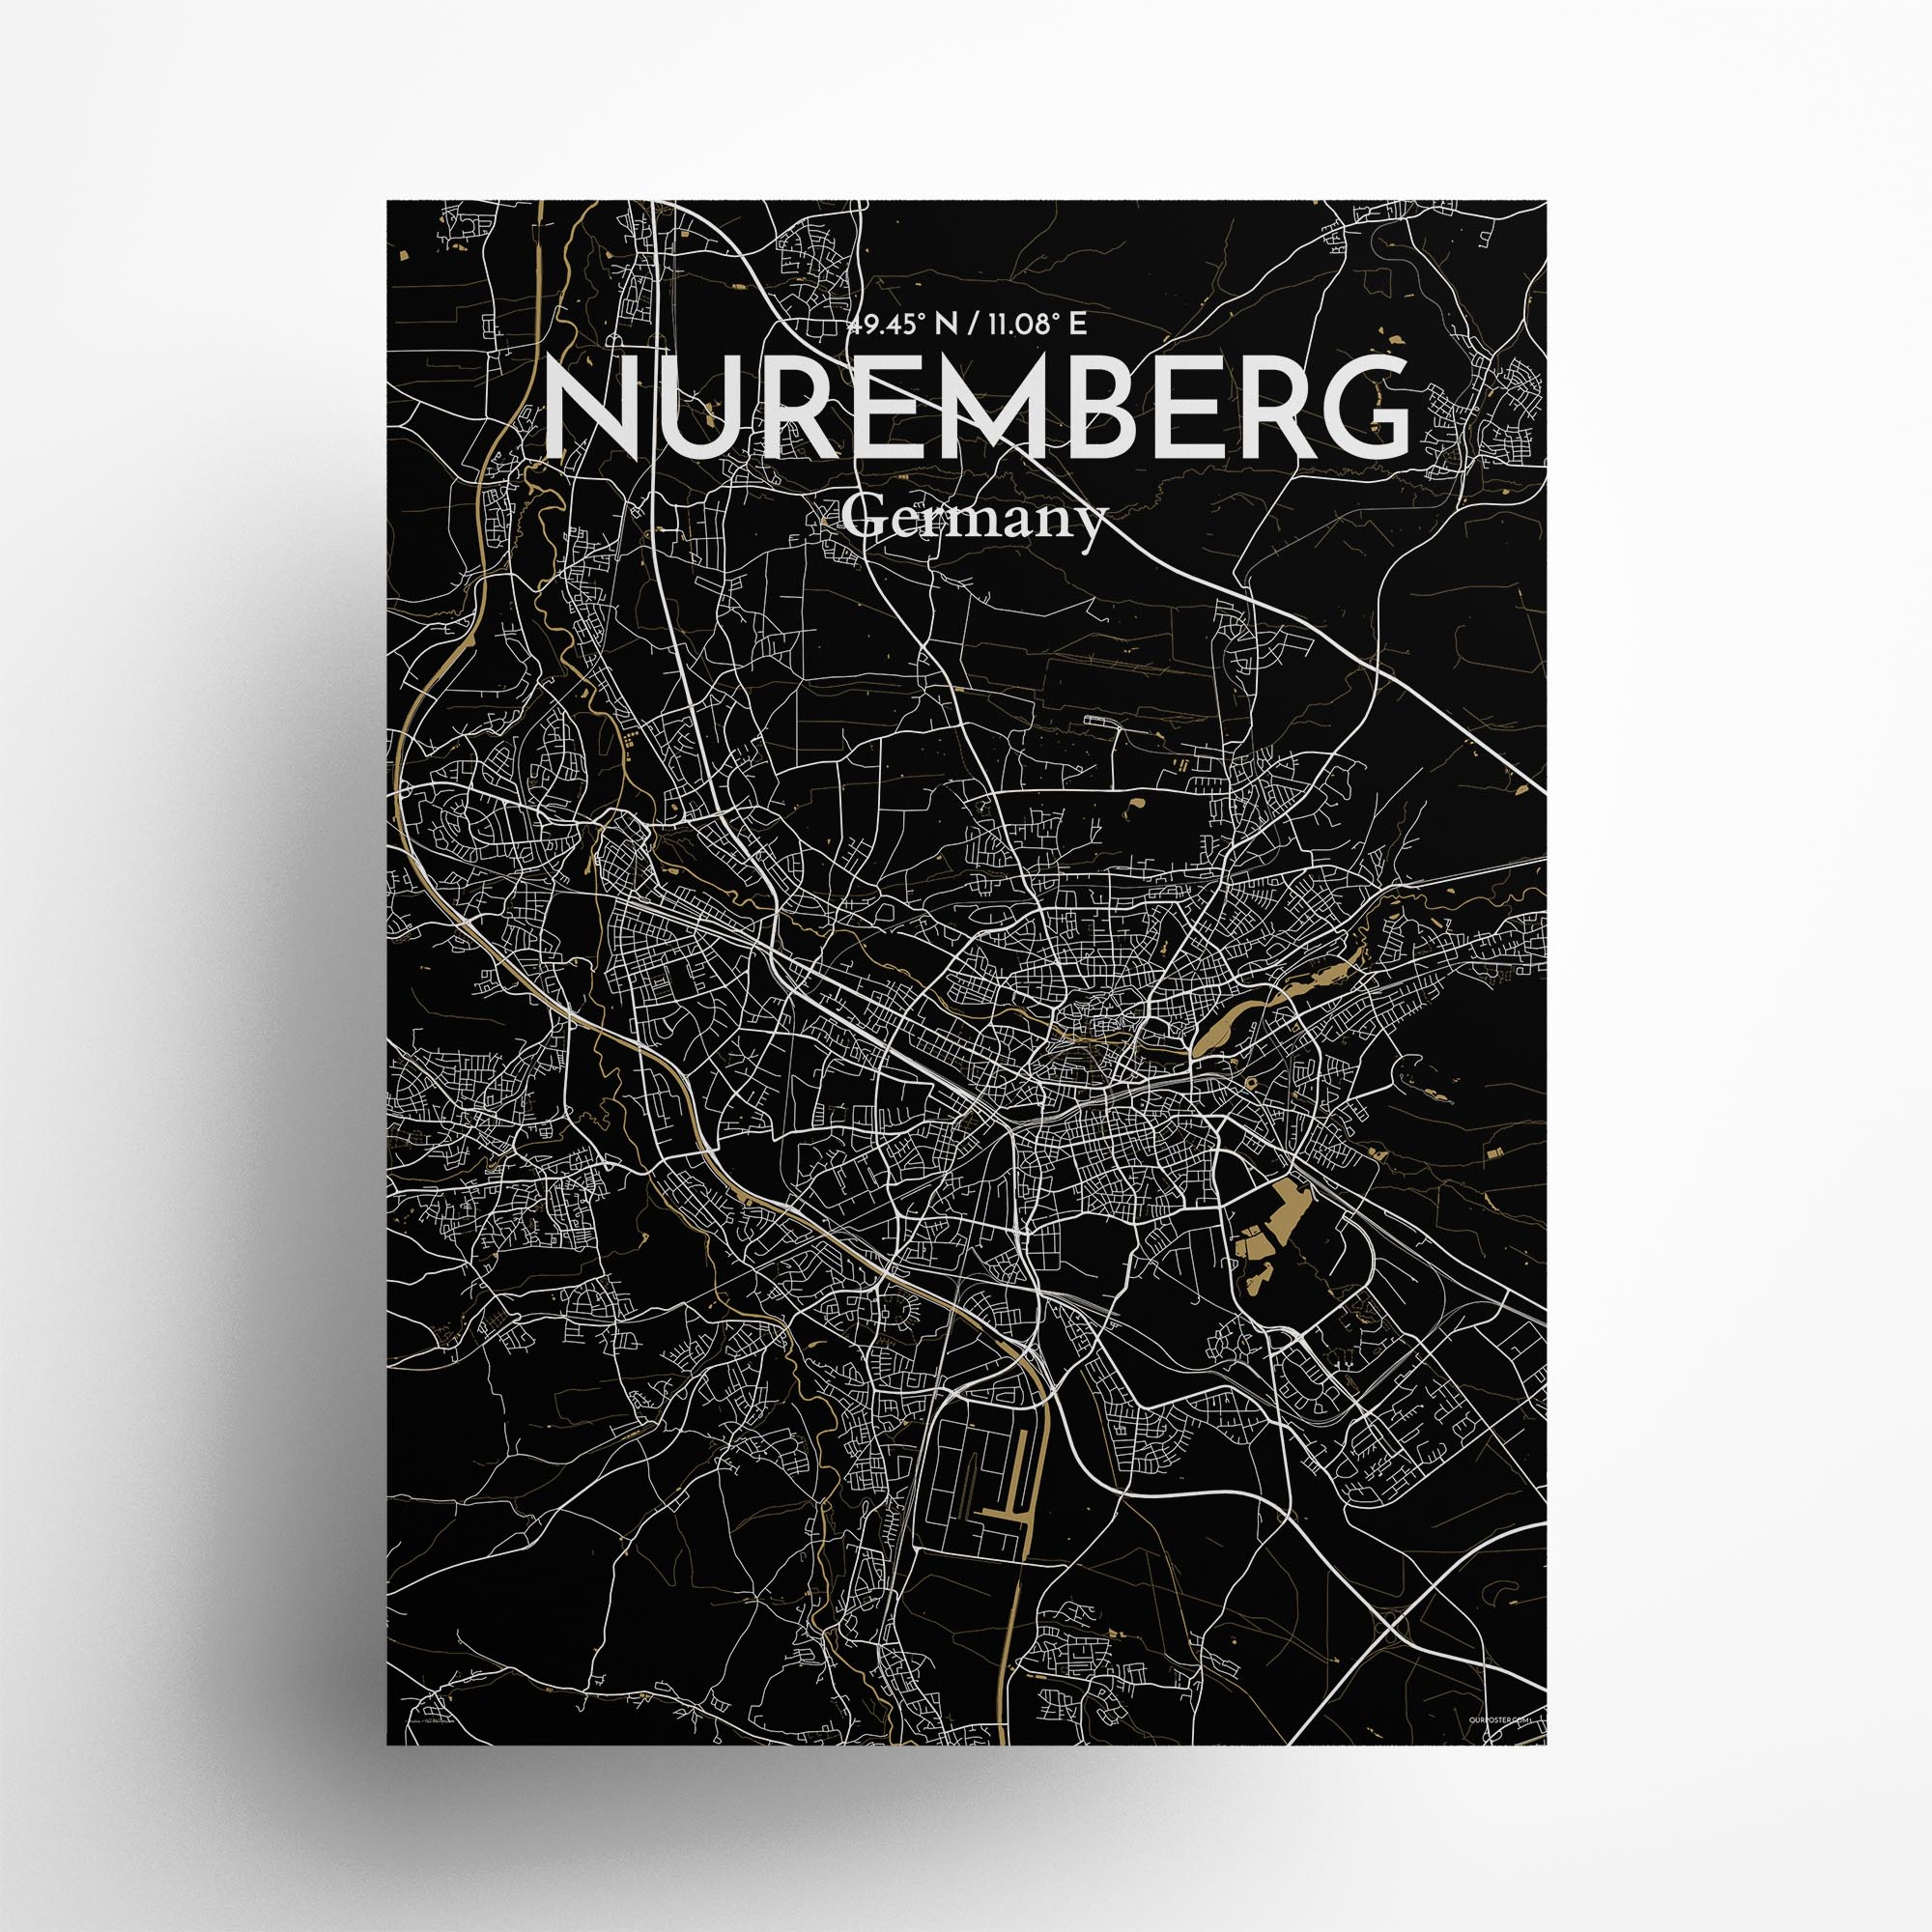 Nuremberg city map poster in Luxe of size 18" x 24"